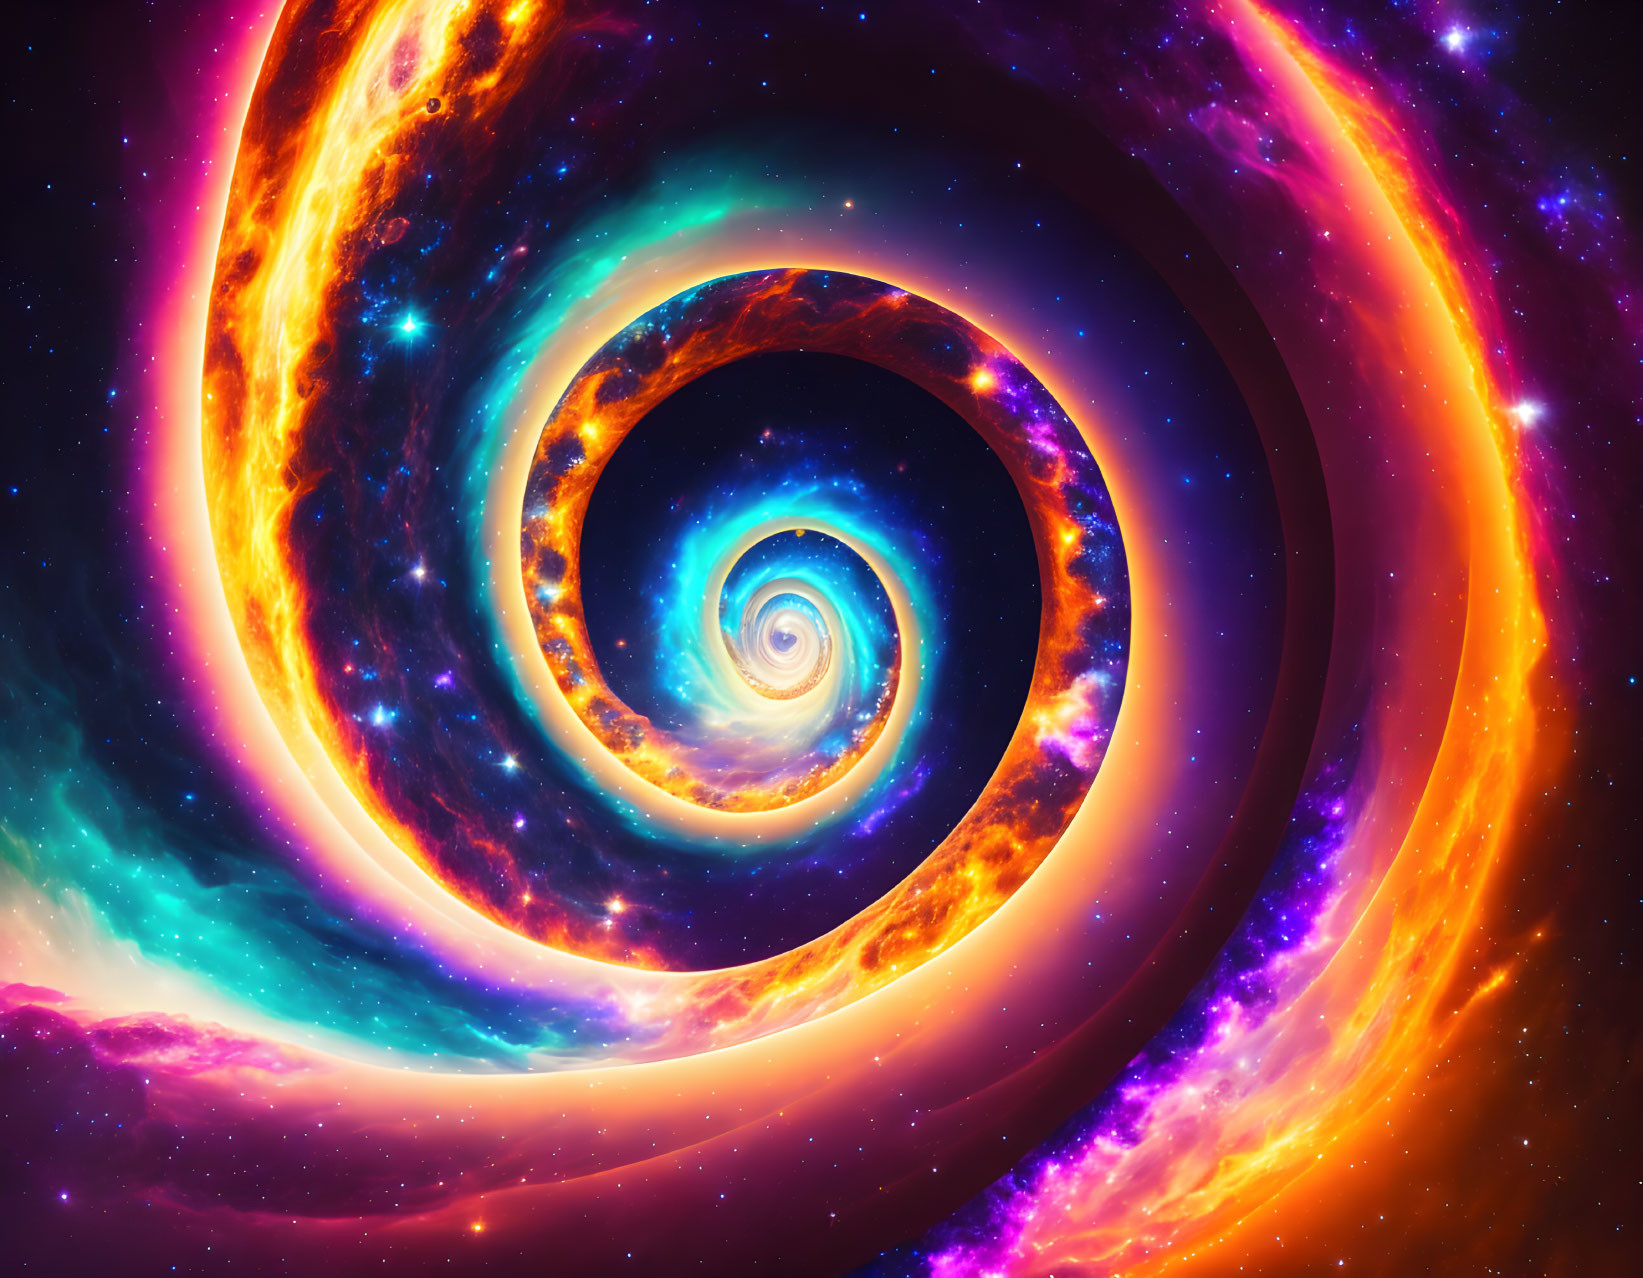 Colorful swirling galaxy digital artwork with spiral pattern in oranges, blues, and purples.